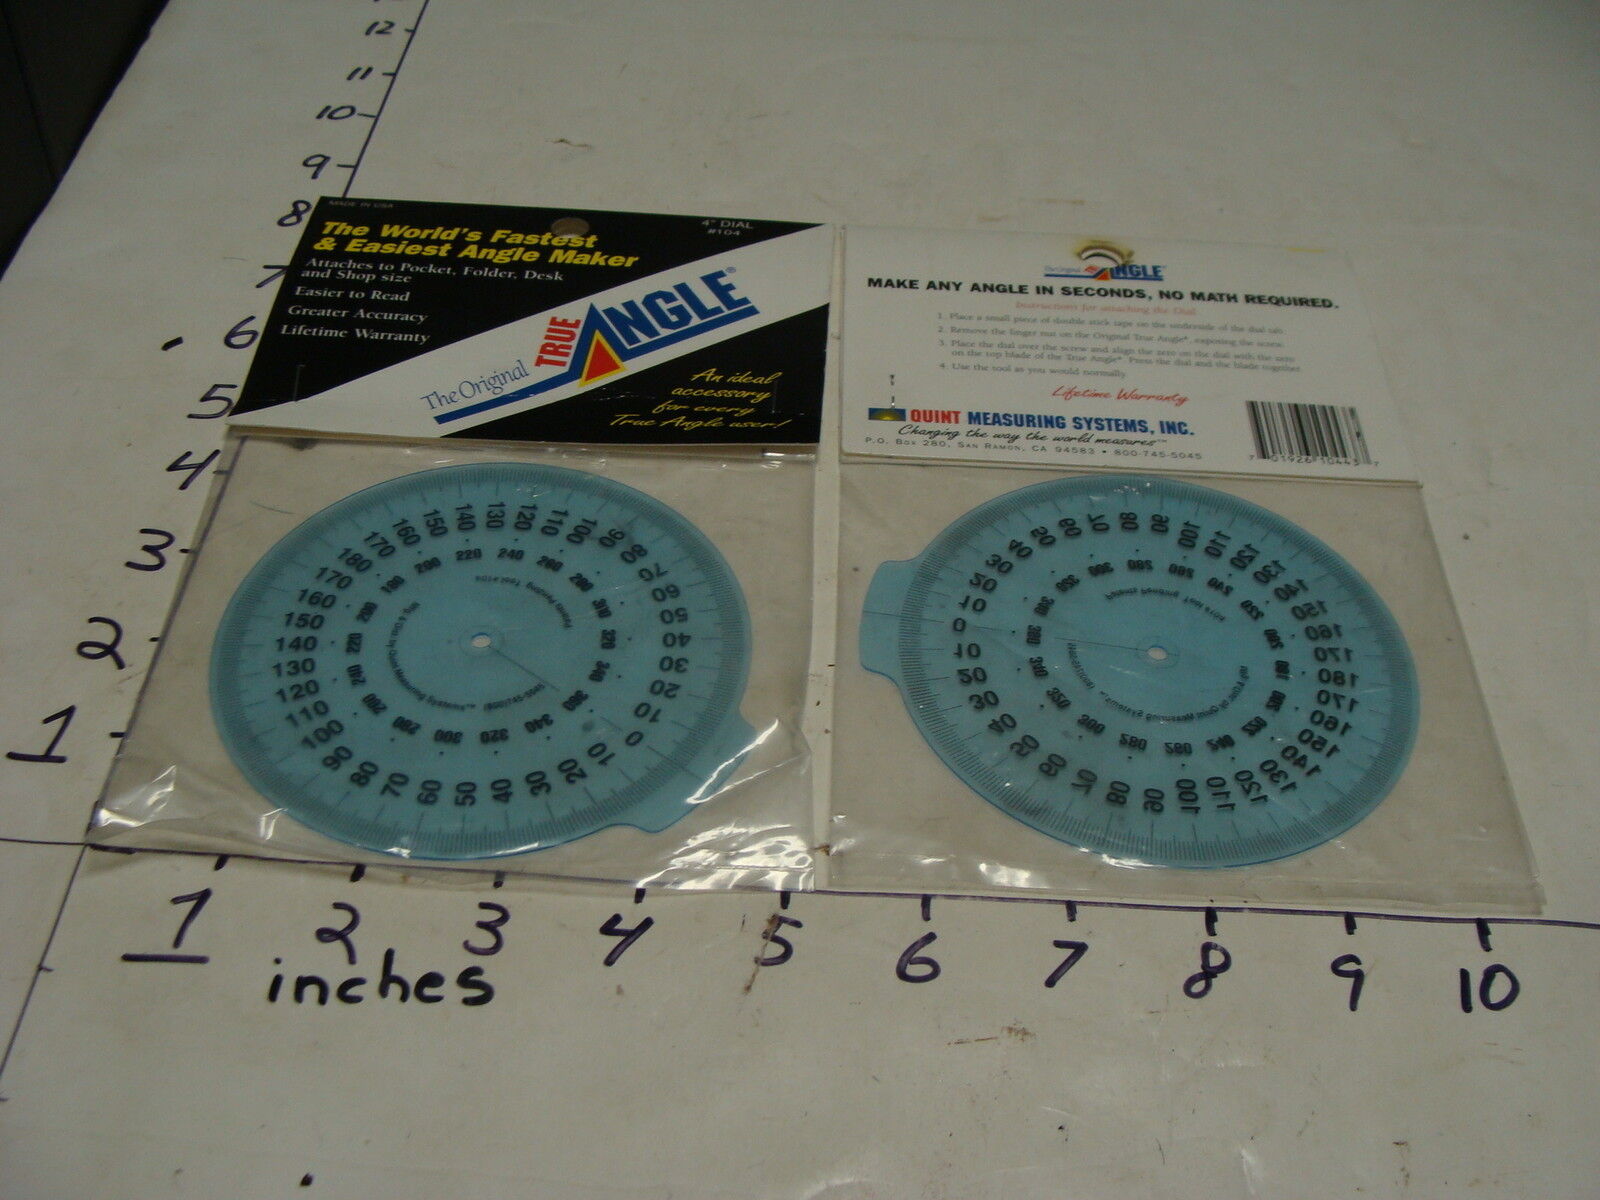 2 sealed TRUE ANGLE MAKERS, 4 inch dial